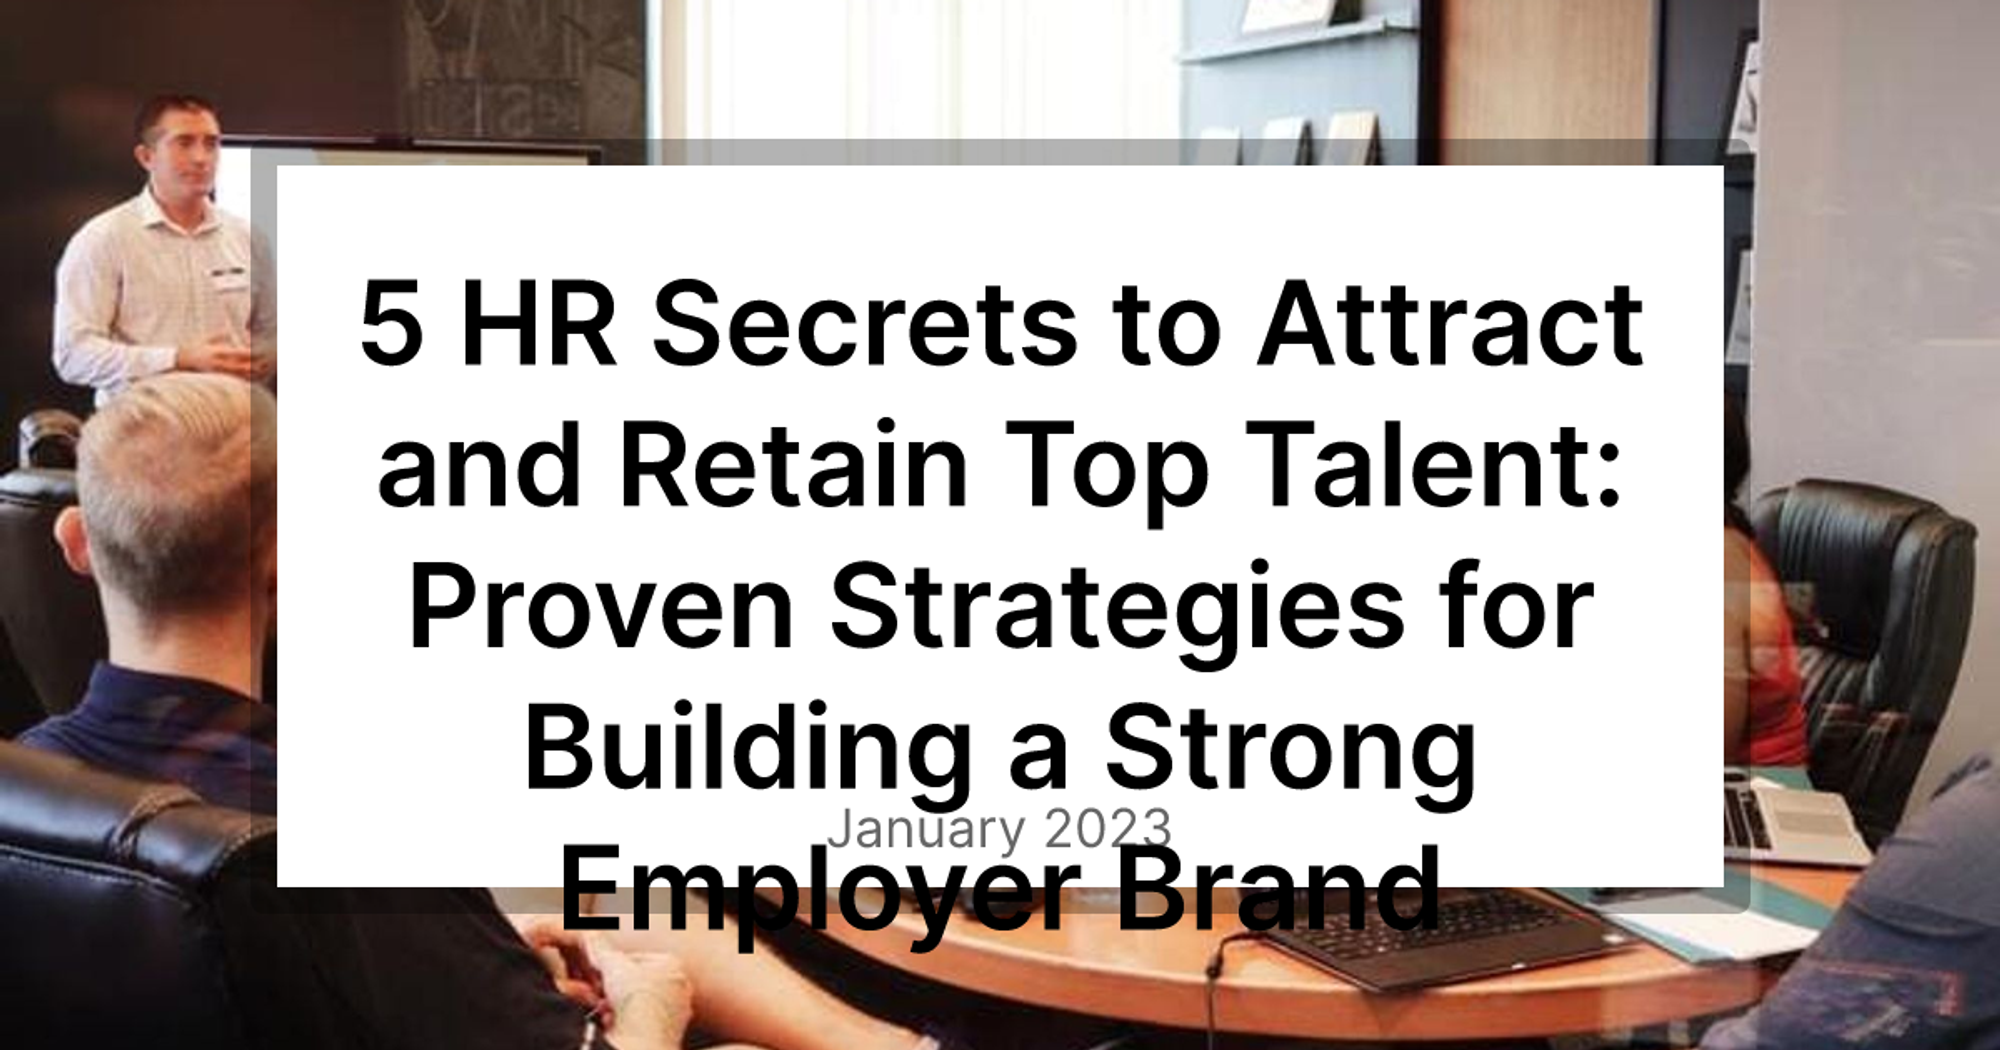 5 HR Secrets to Attract and Retain Top Talent: Proven Strategies for Building a Strong Employer Brand